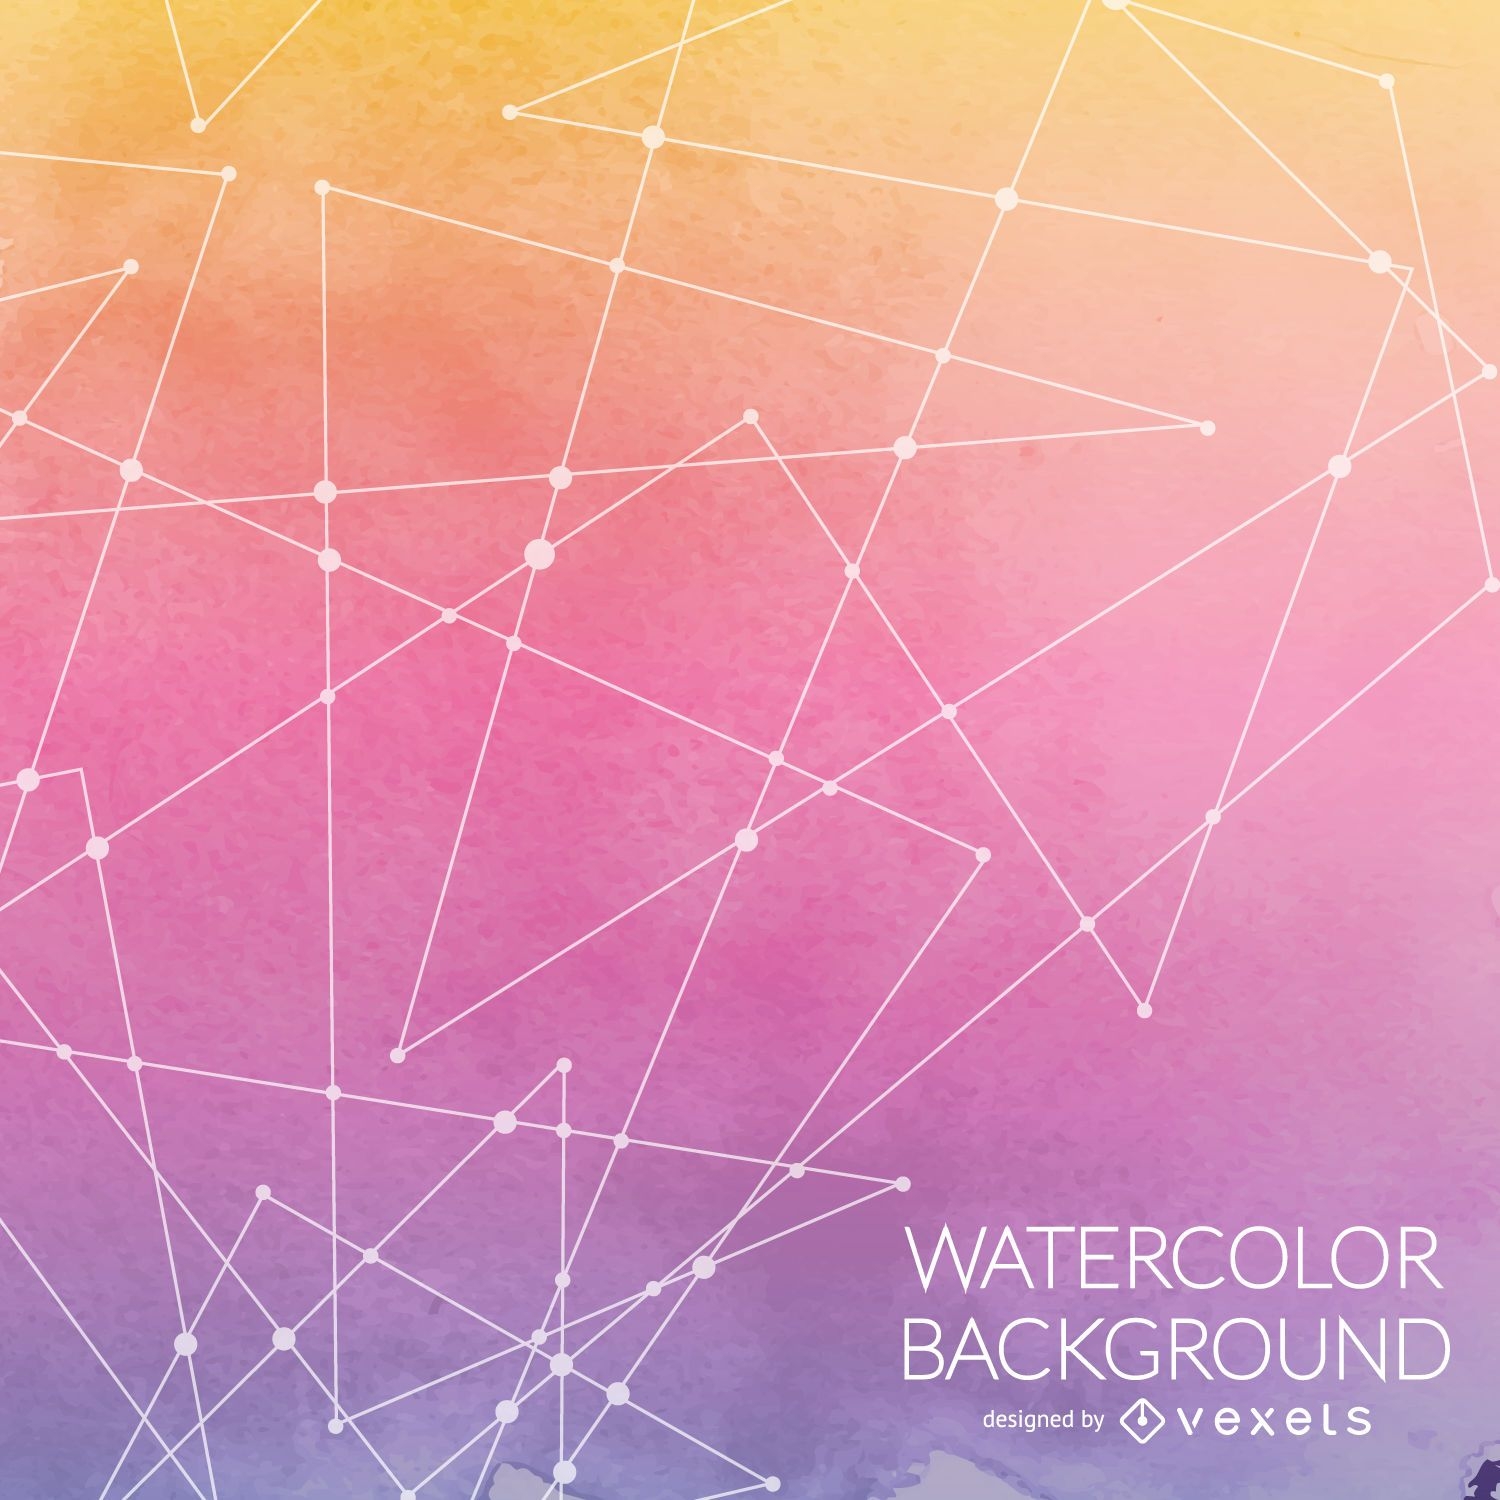 Abstract watercolor background with lines